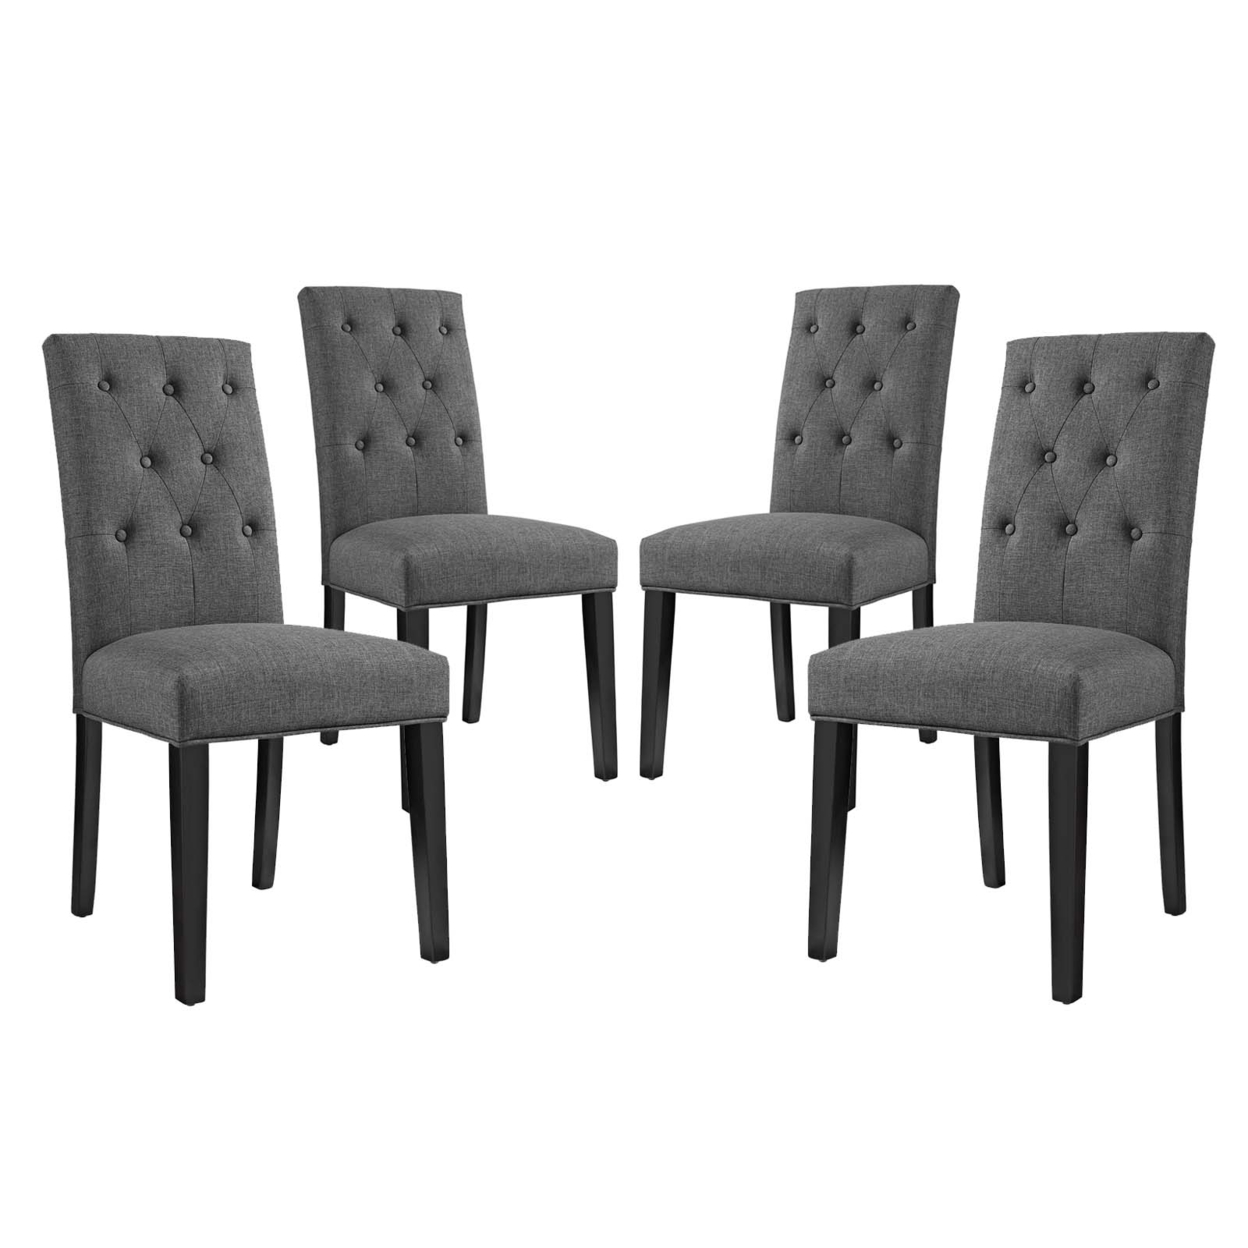 Confer Dining Side Chair Fabric Set of 4, Gray